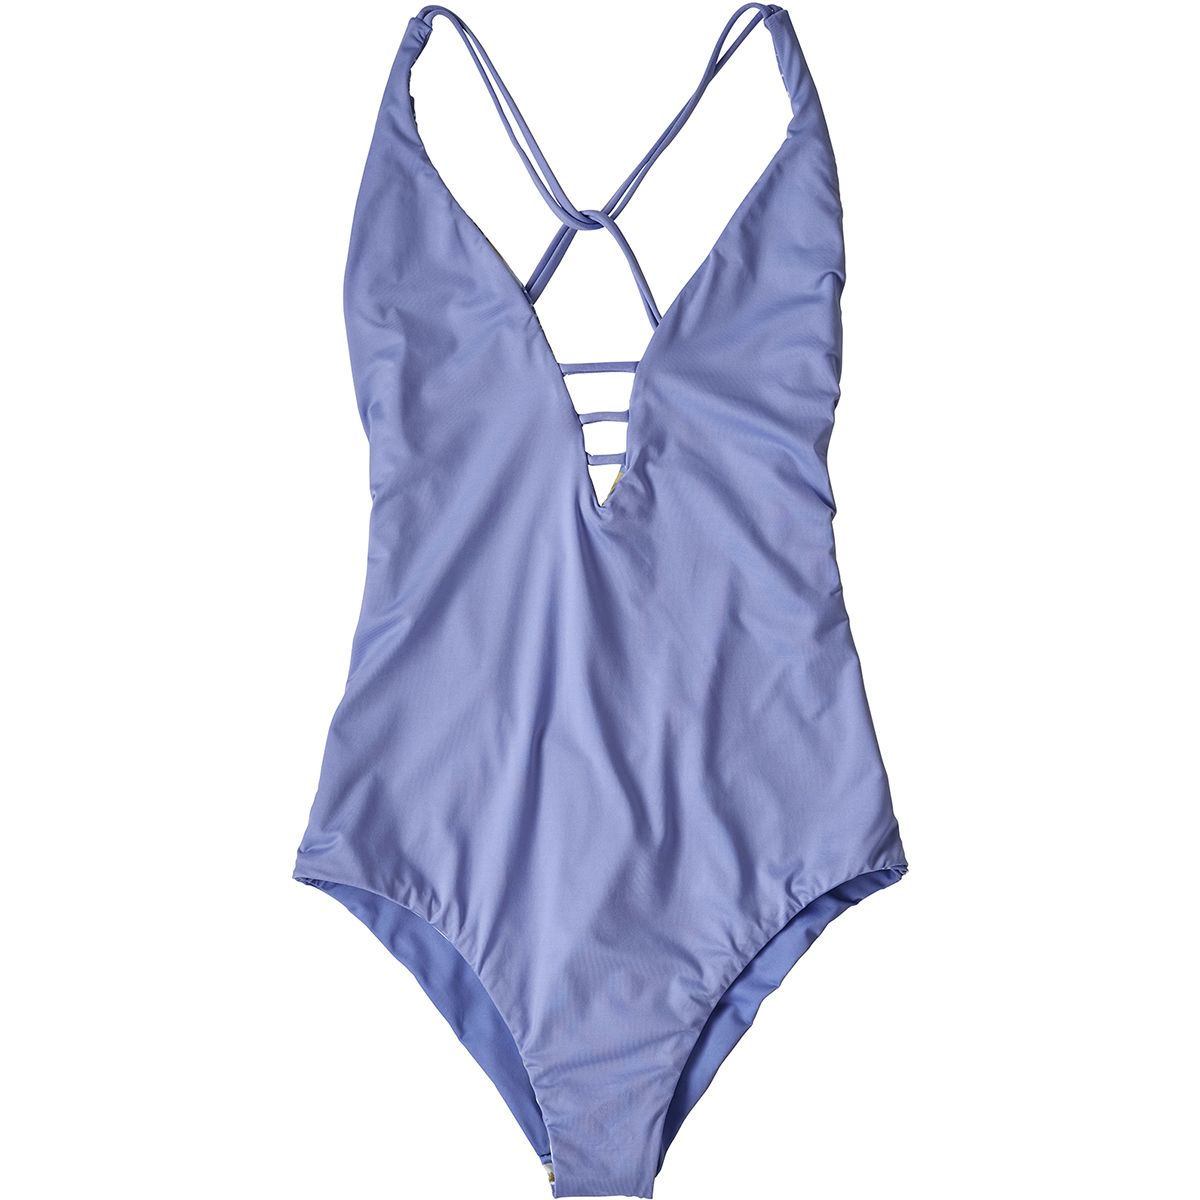 Patagonia Reversible Extended Break One-Piece Swimsuit - Women's - Clothing